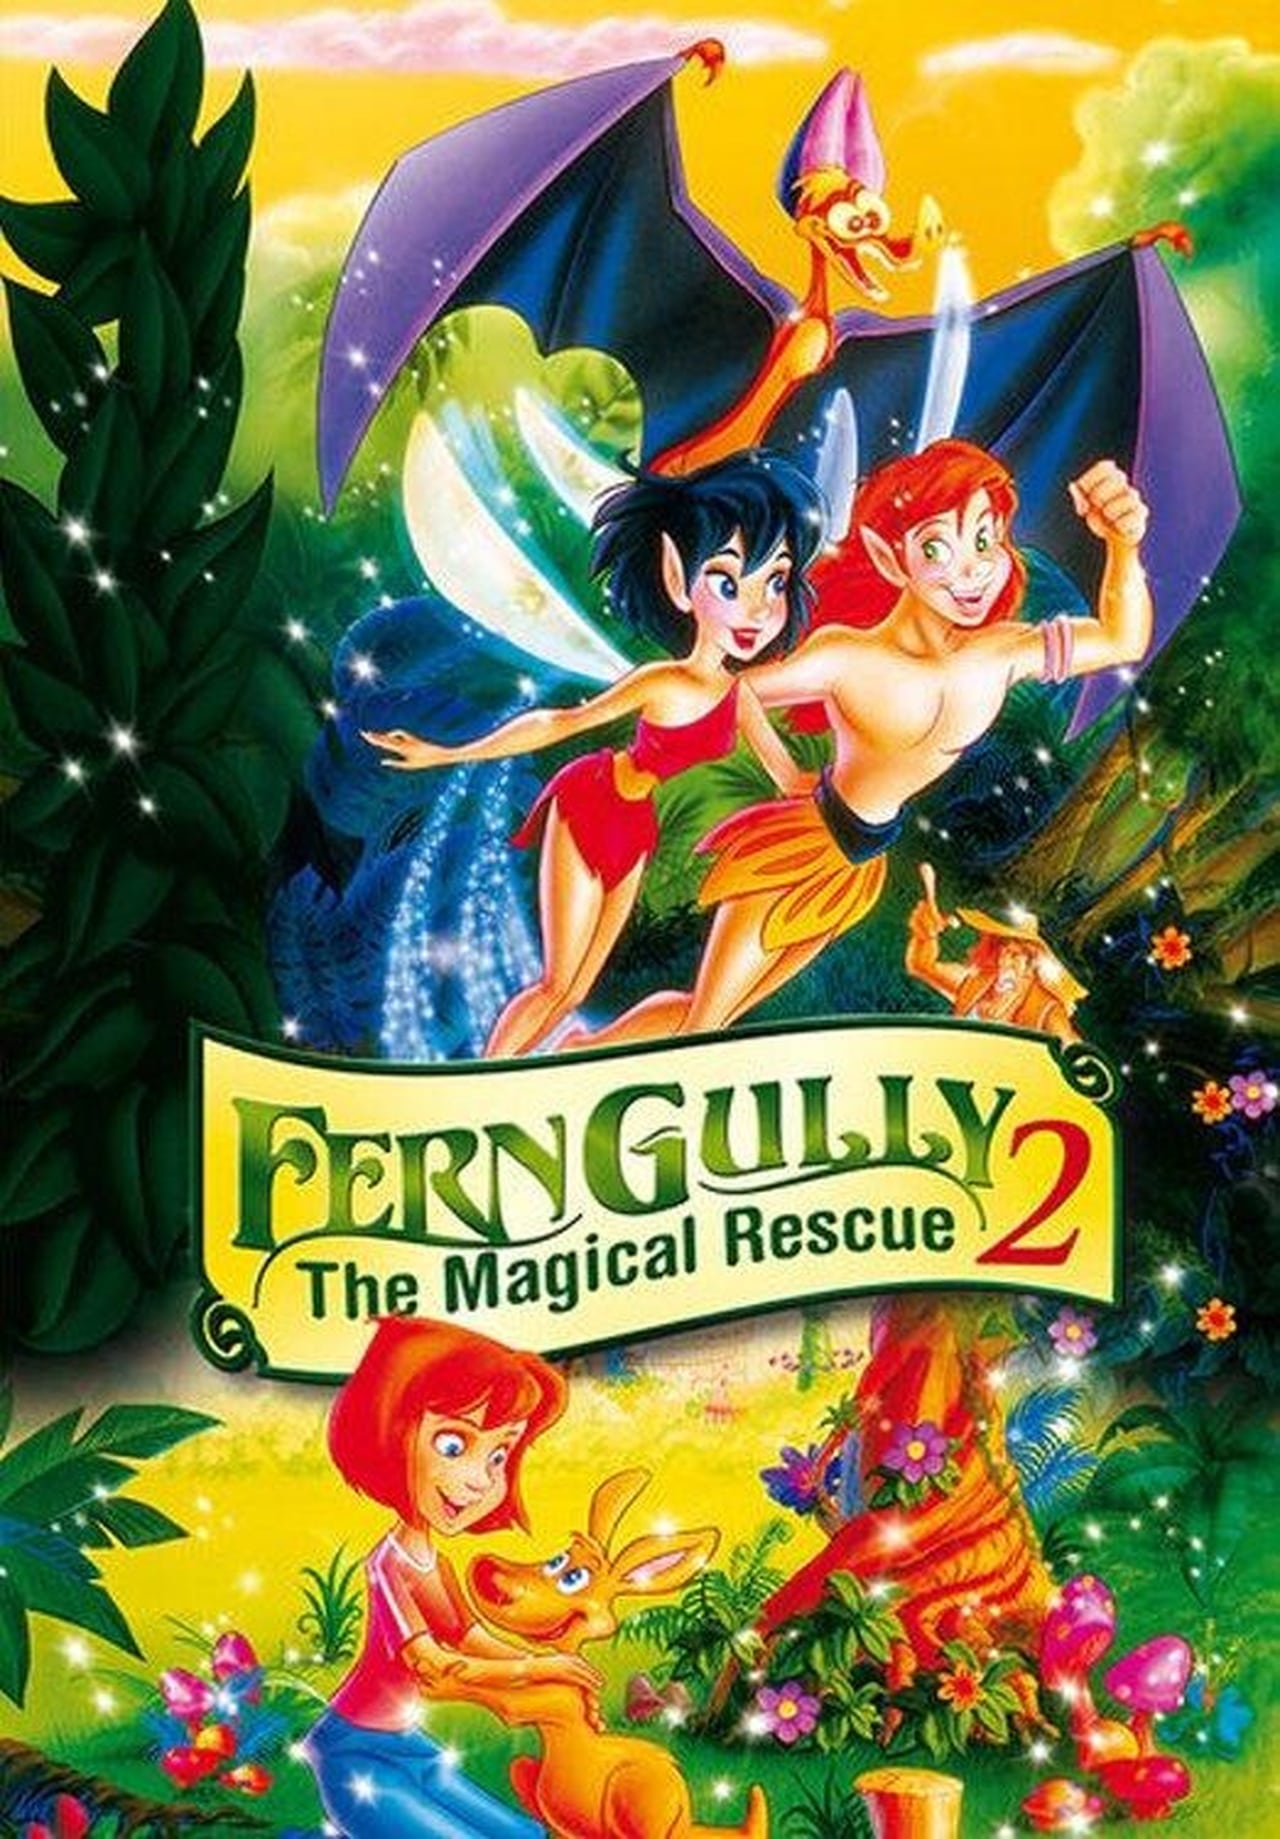 FernGully 2 The Magical Rescue wiki, synopsis, reviews, watch and download